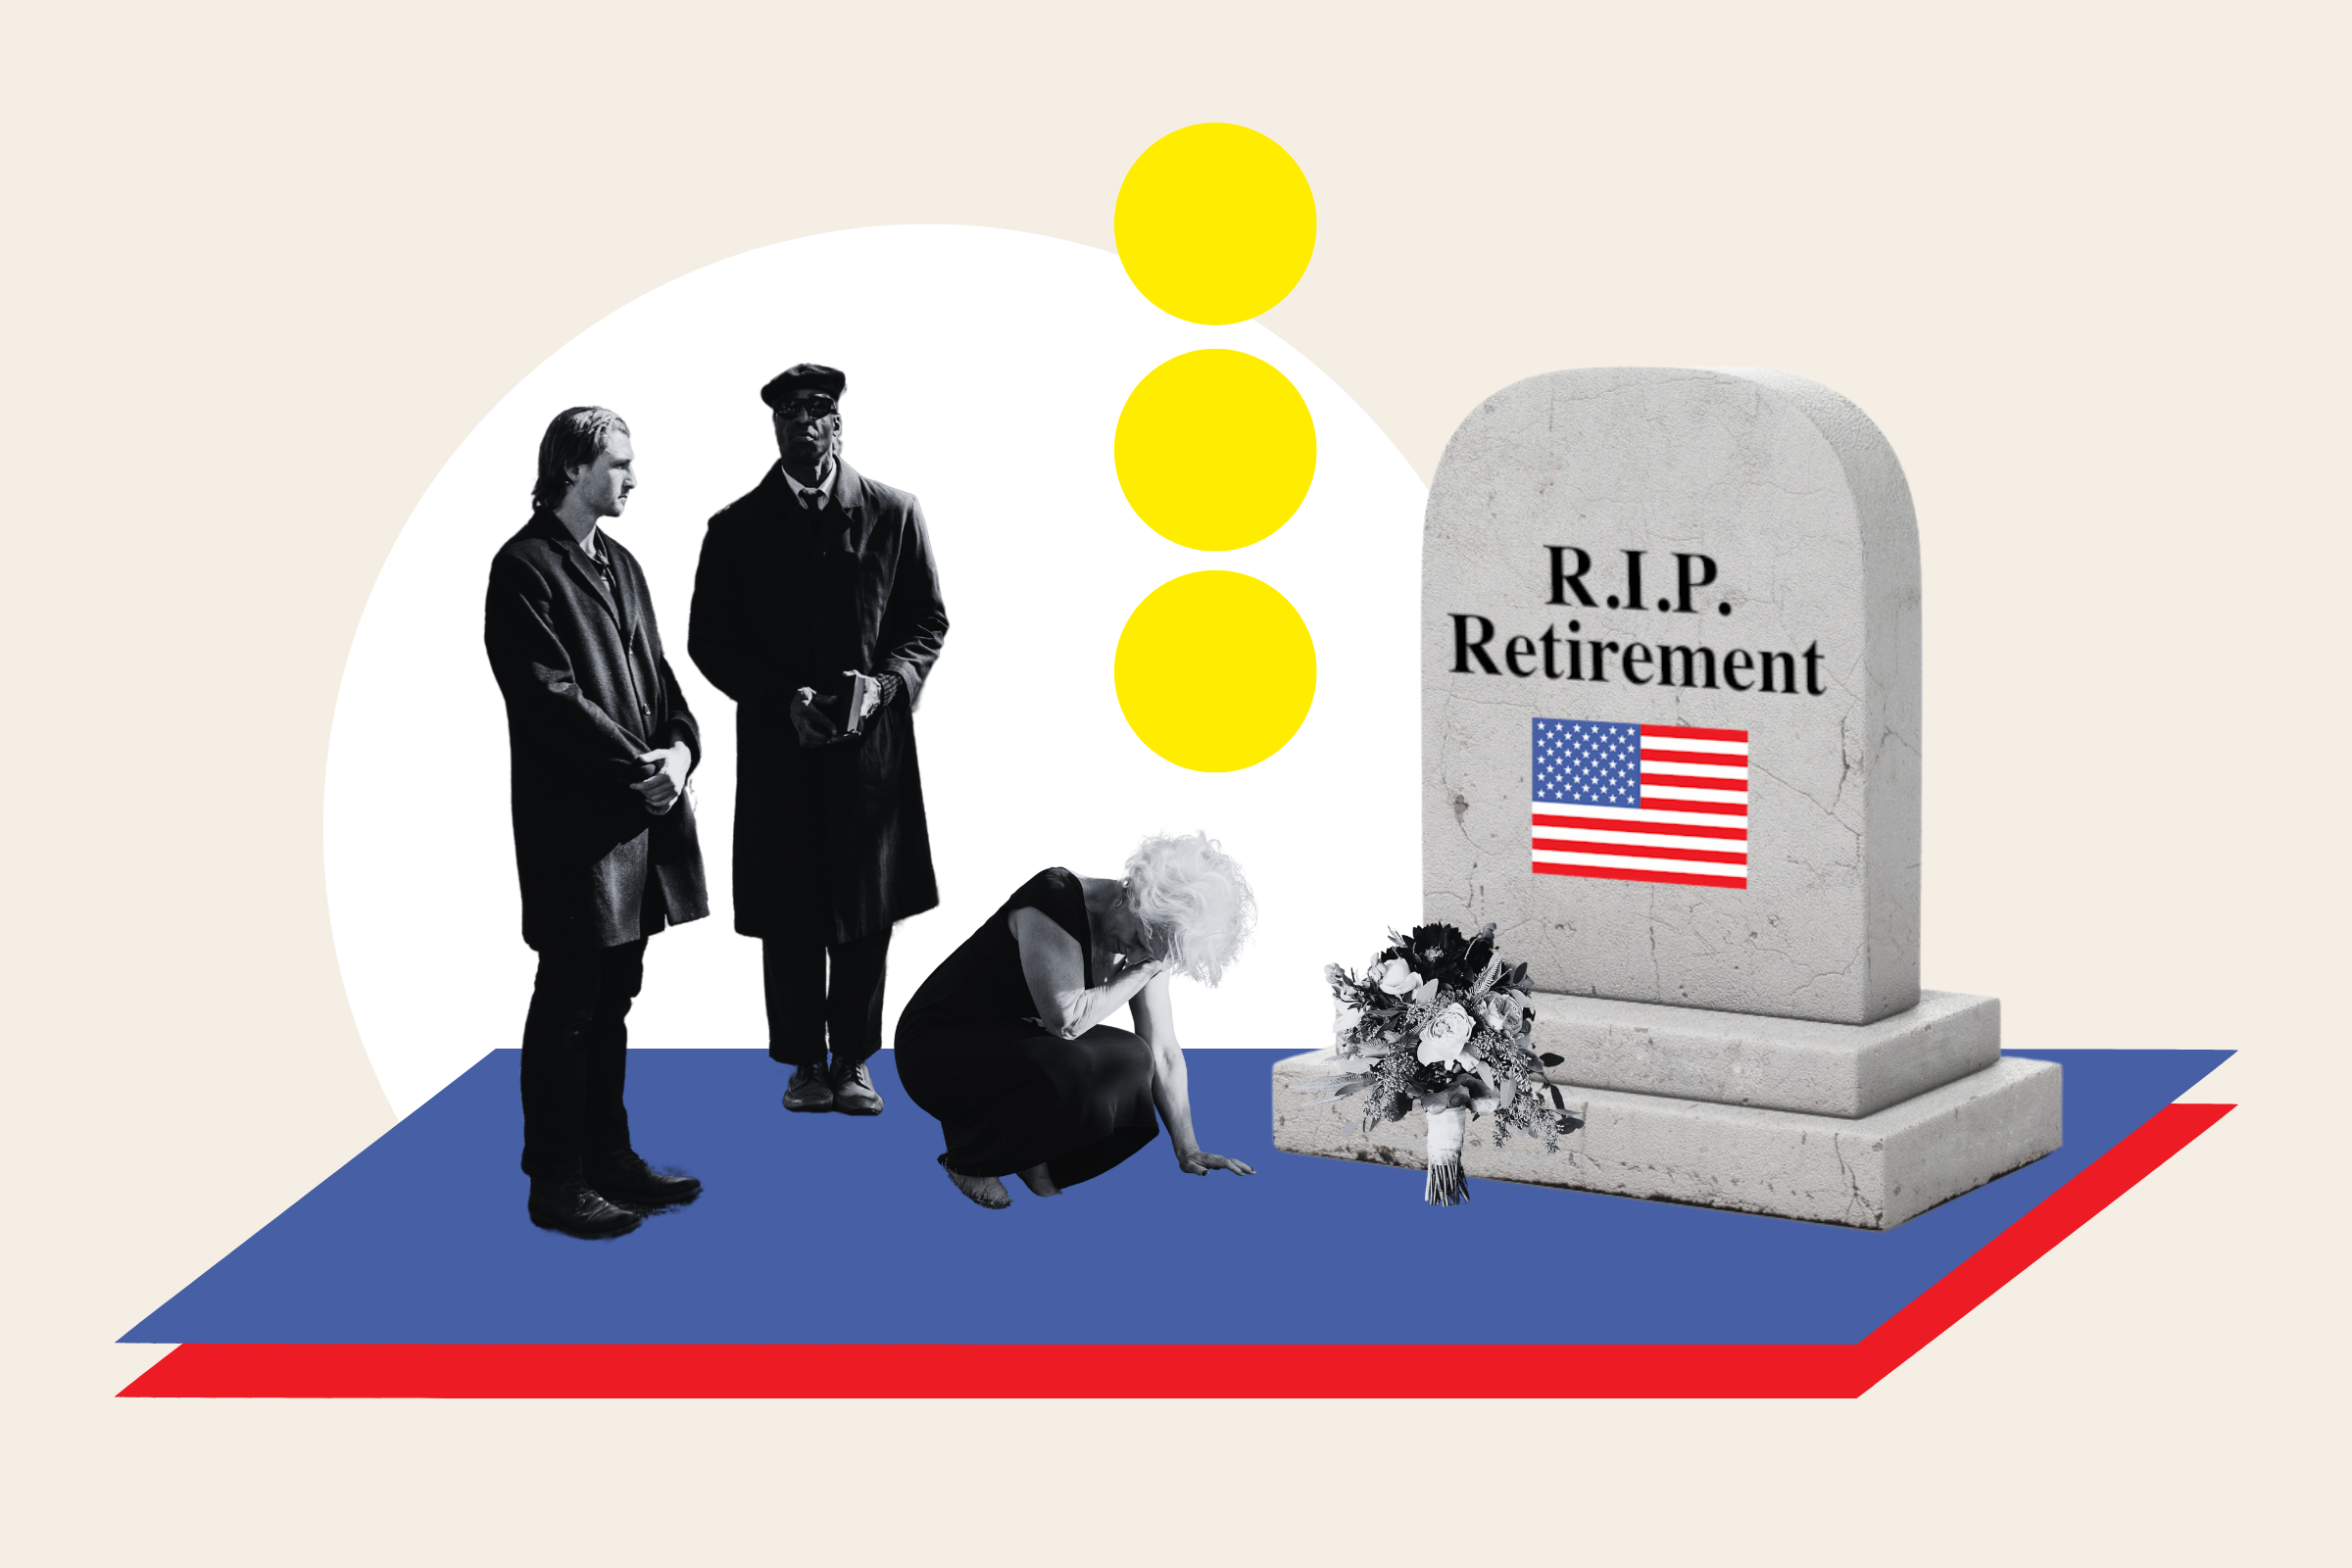 America’s retirement dream is dying